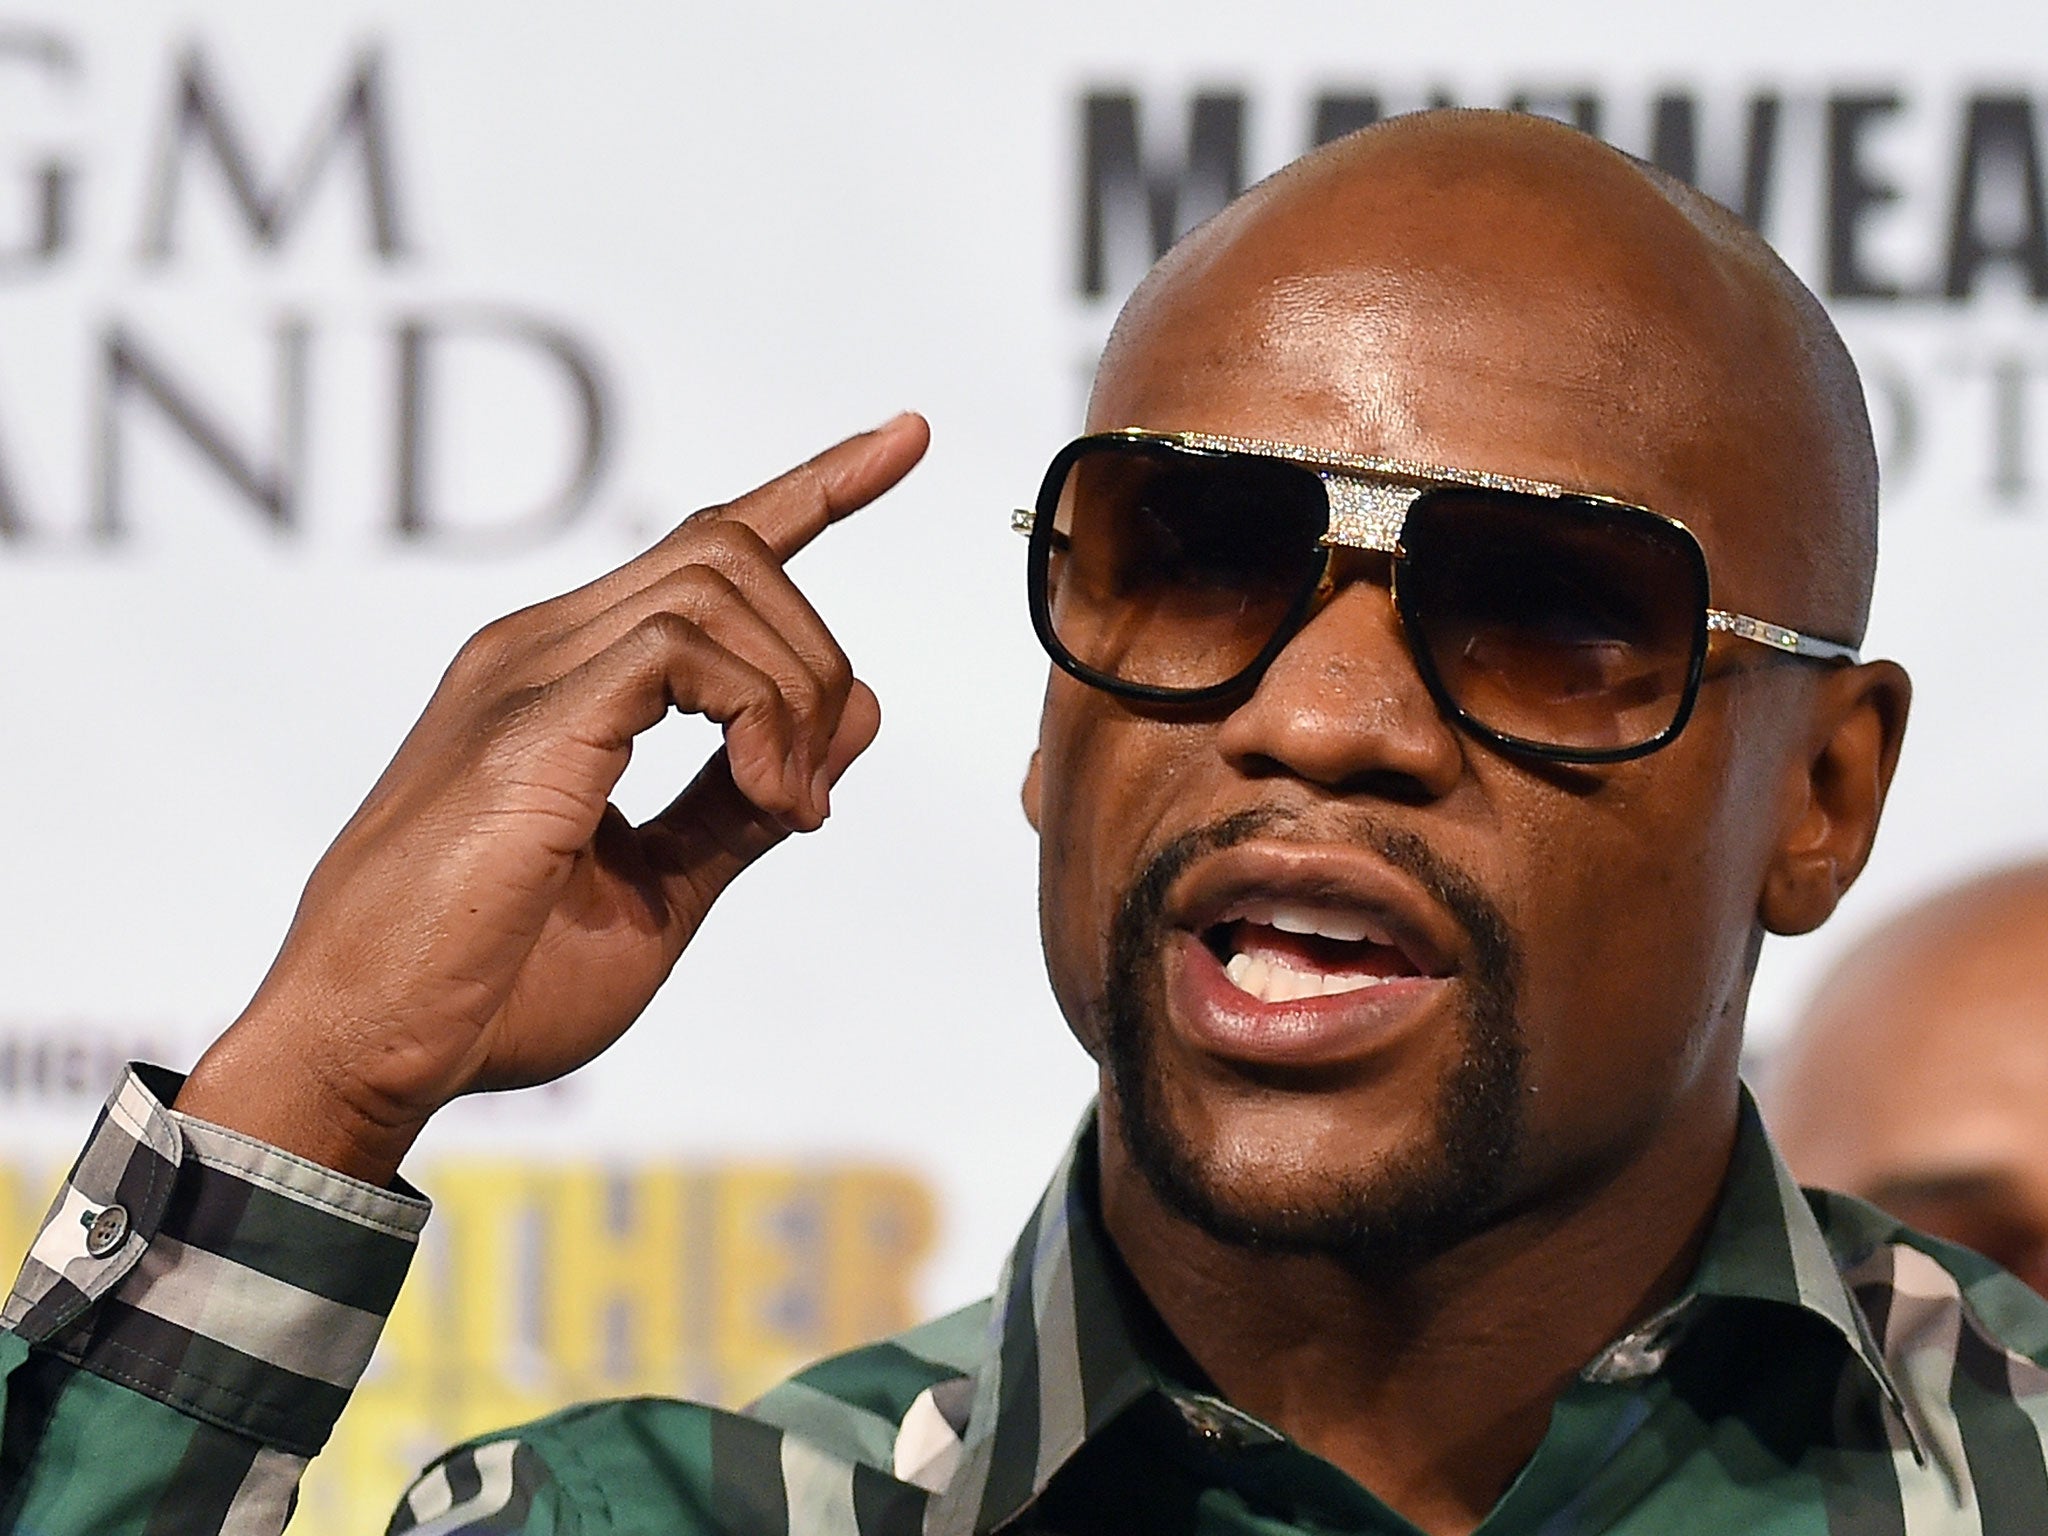 Floyd Mayweather vs Andre Berto weigh-in live stream watch the latest here The Independent The Independent